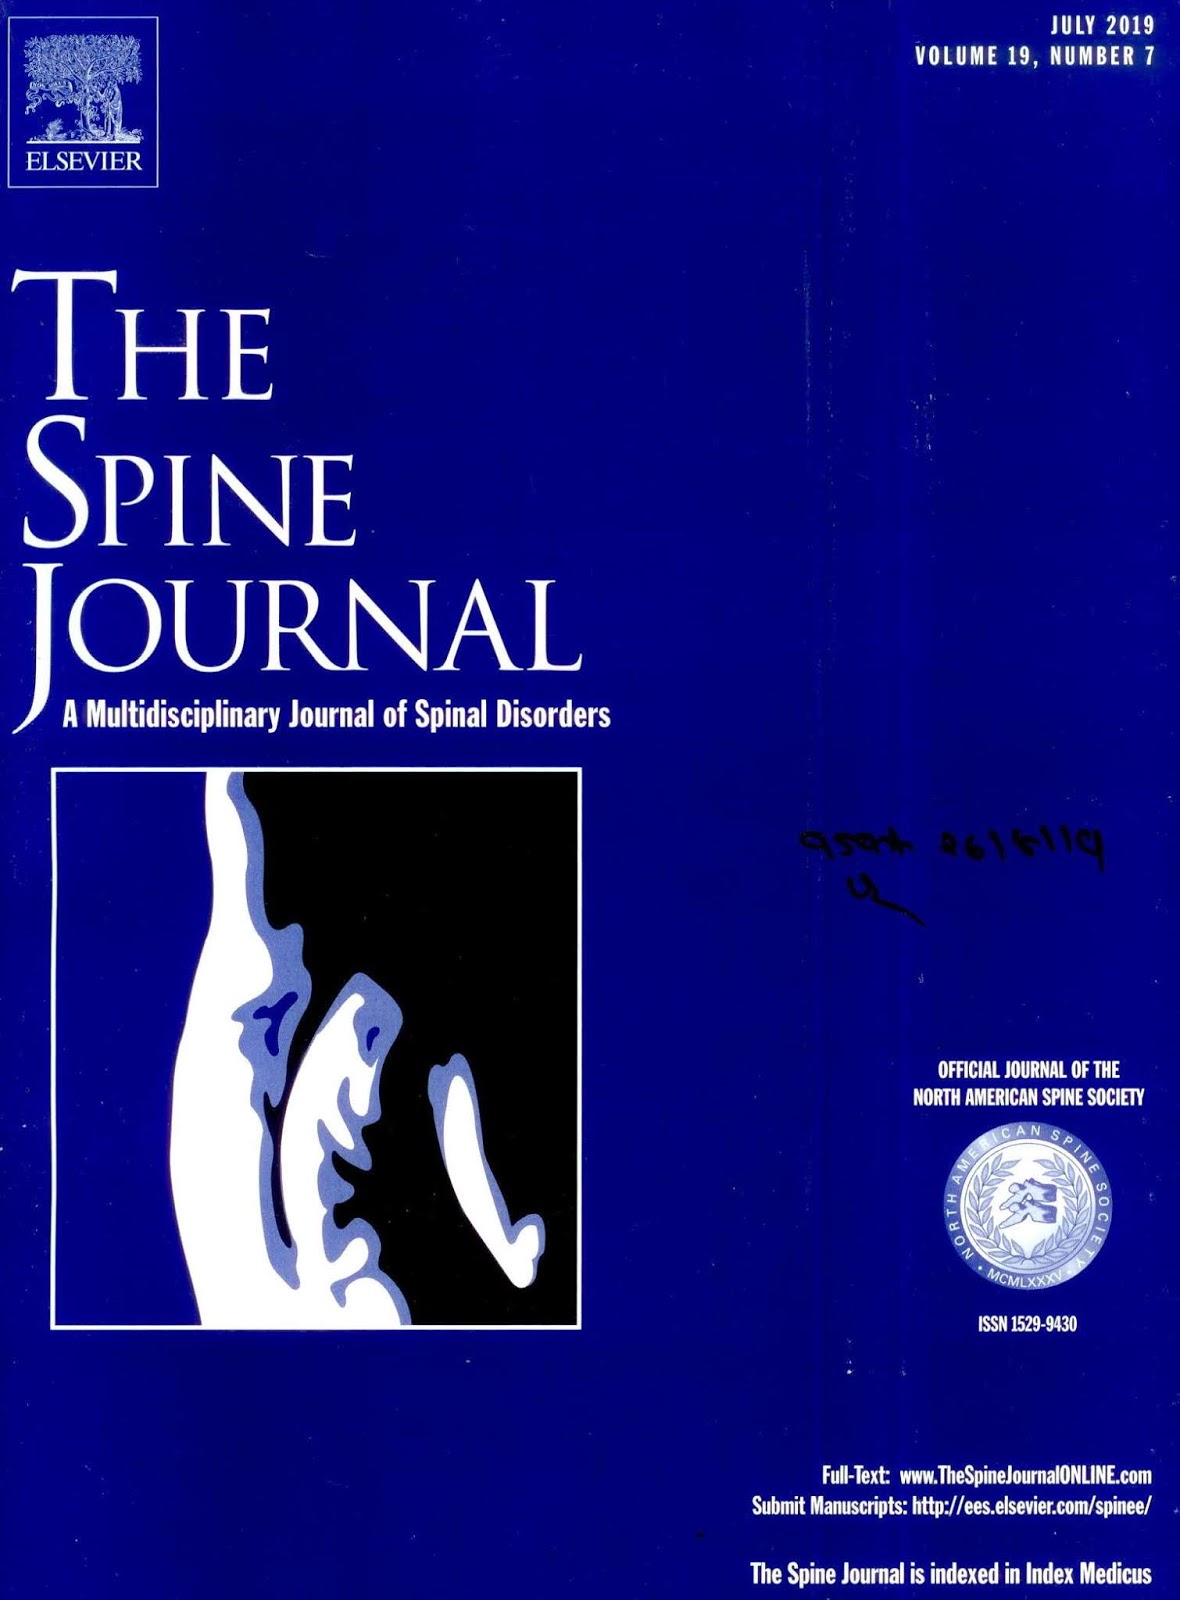 https://www.thespinejournalonline.com/issue/S1529-9430(19)X0006-6